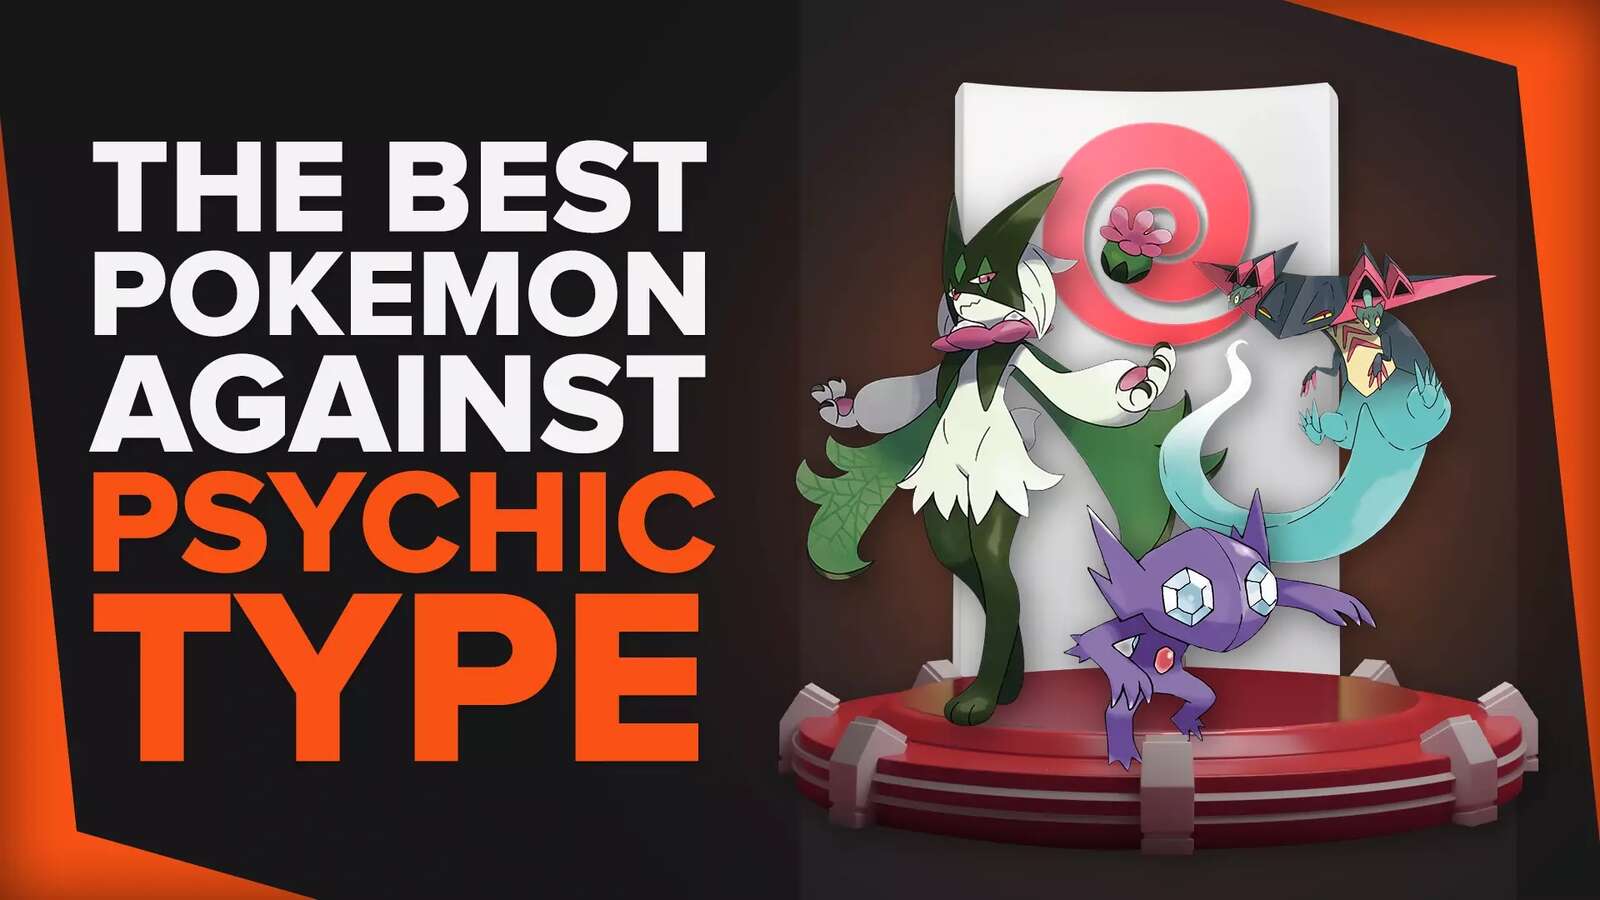 The 10 Pokemon That Are Best Against Psychic Type Pokemon